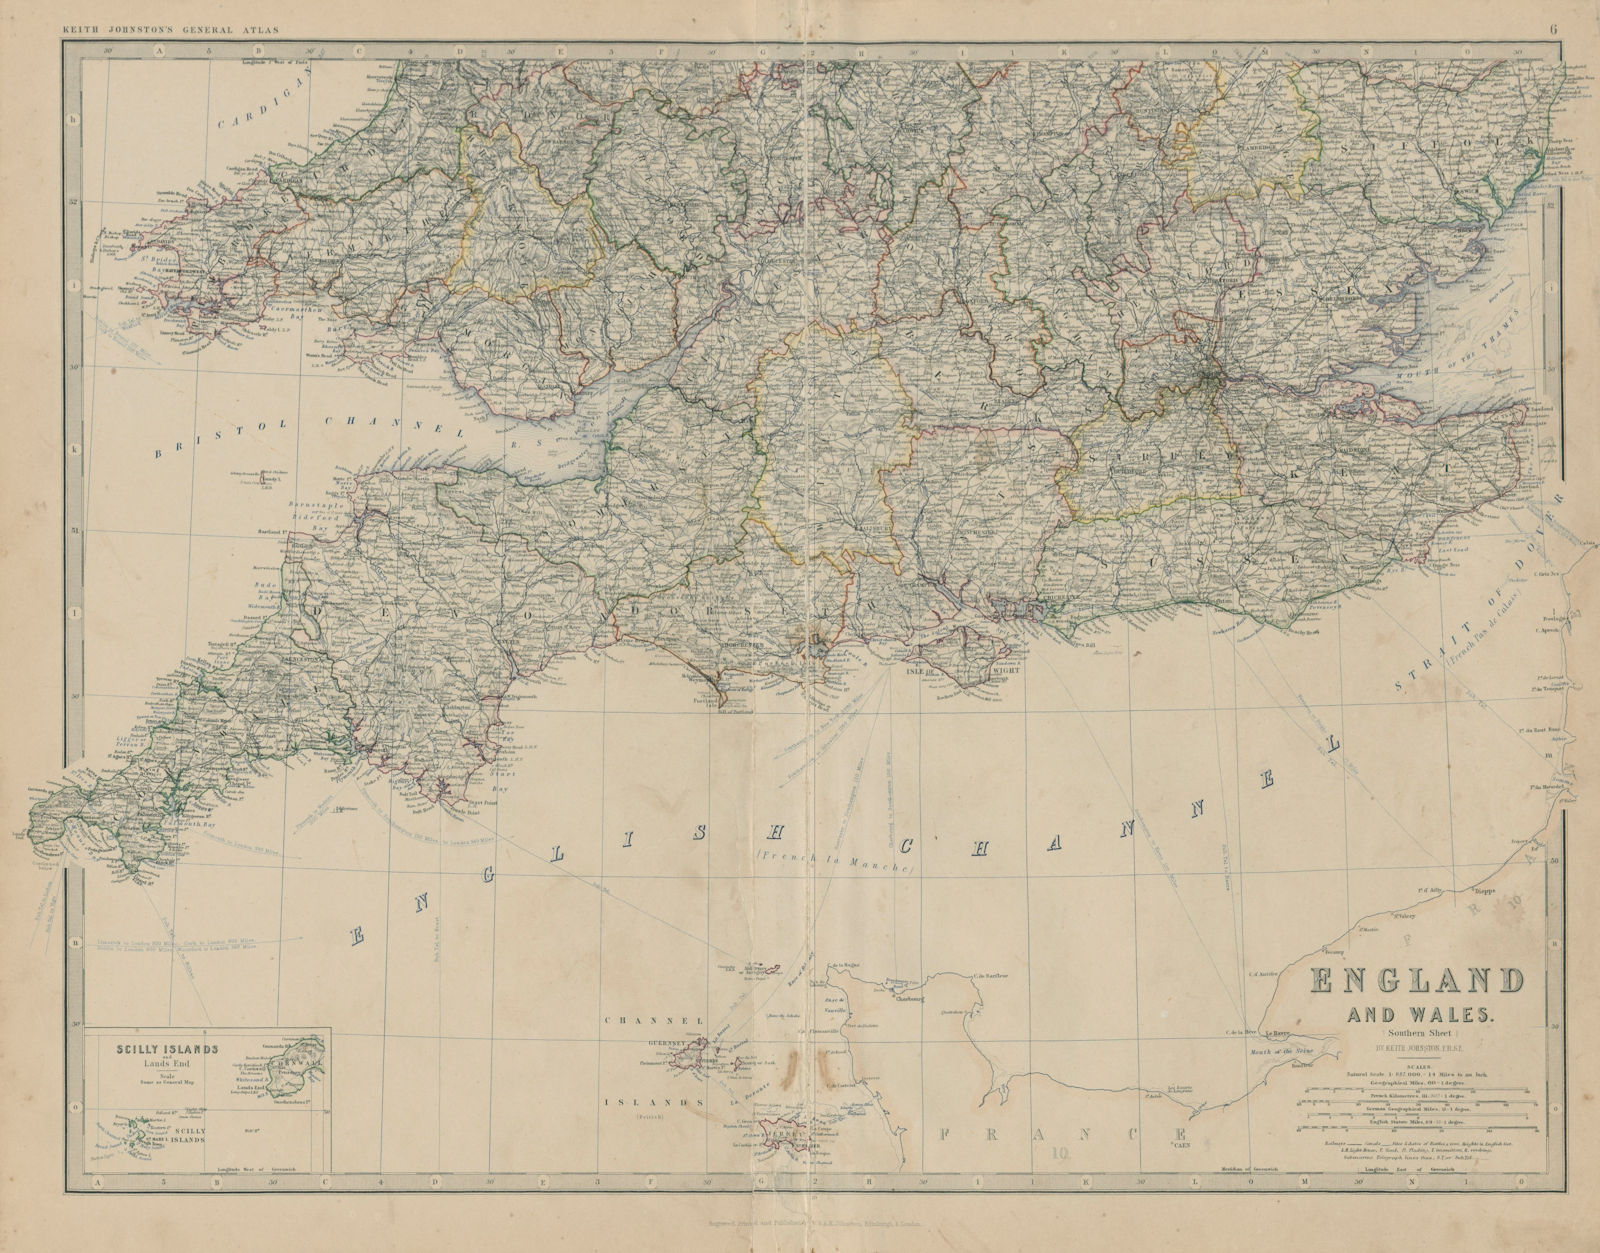 Associate Product England & Wales (South) Scilly Islands English Channel 50x60cm JOHNSTON 1879 map